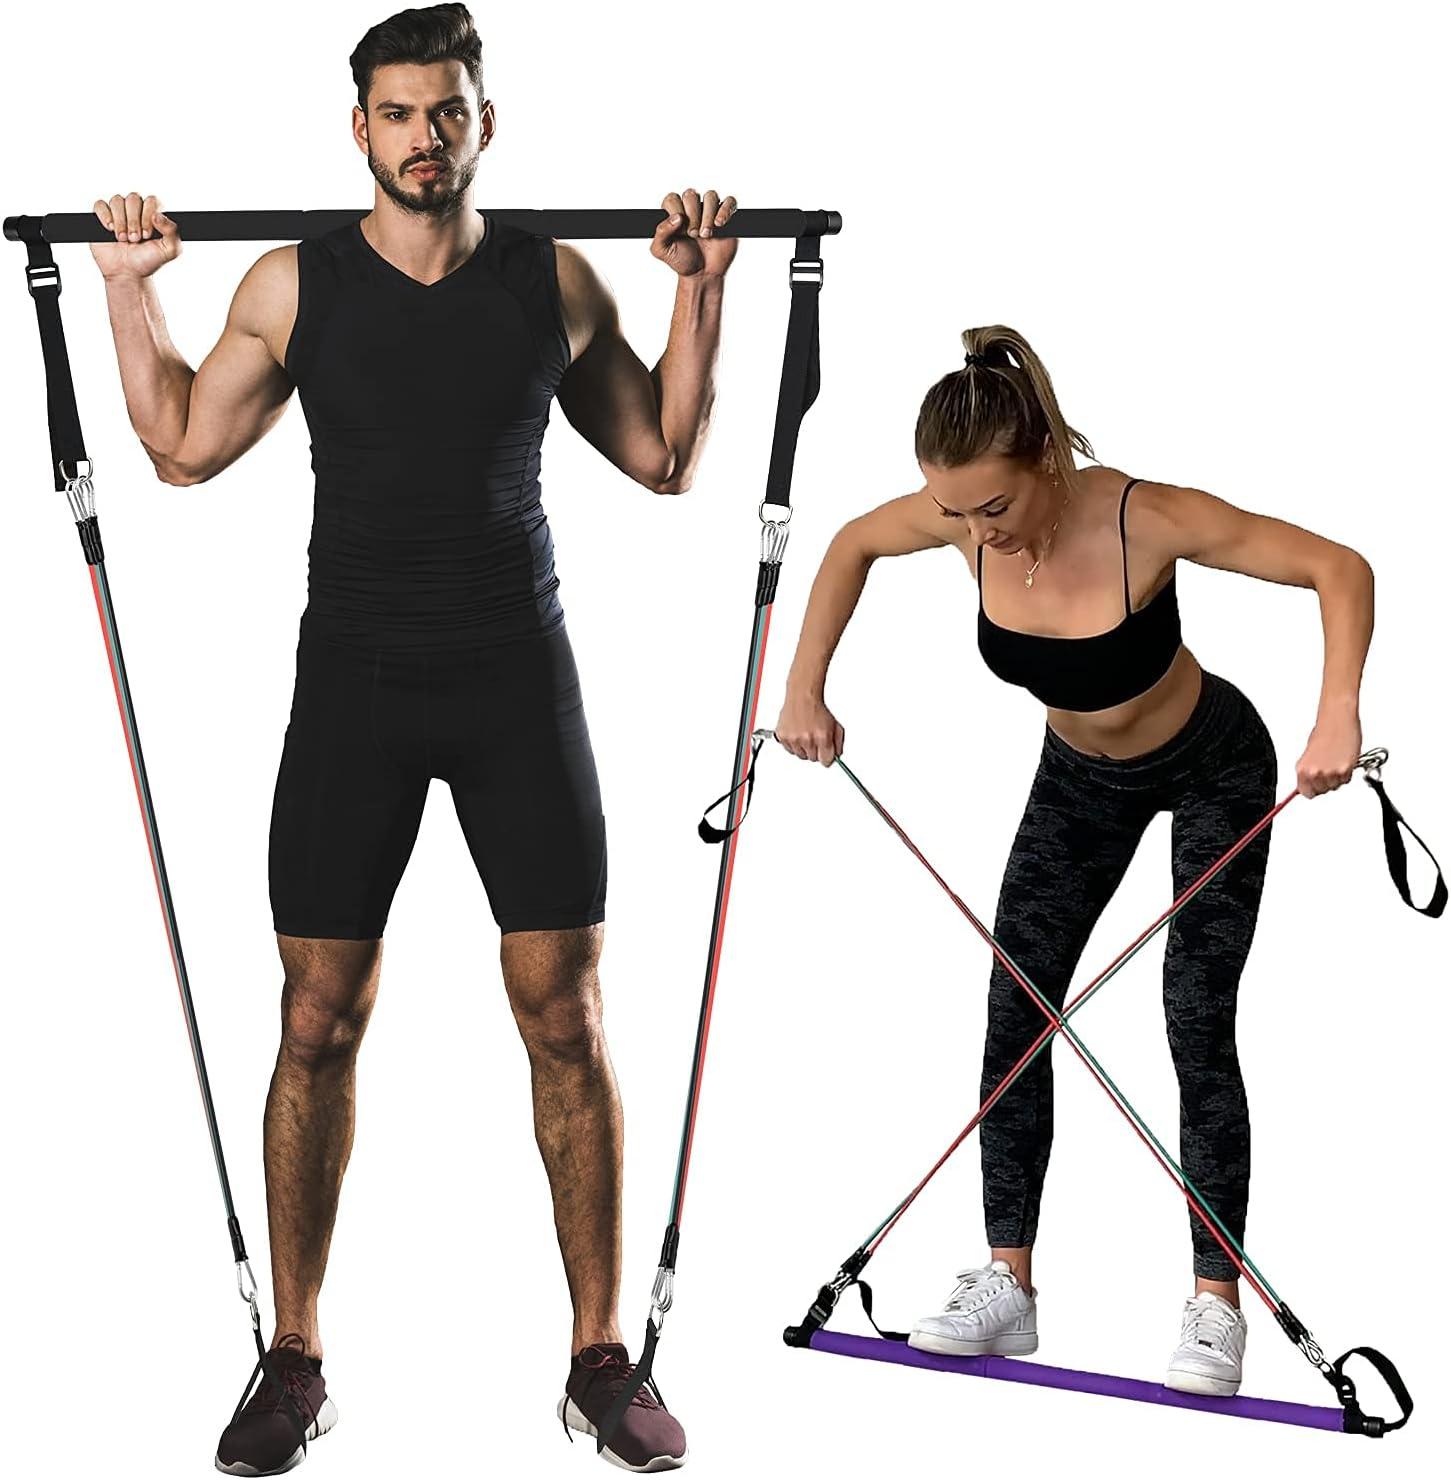 Portable Pilates Bar Kit With Resistance Bands For Men And Women - 6  Exercise Resistance Bands (15, 20, 30 LB) - Home Gym Equipment - Supports  Full-Bo